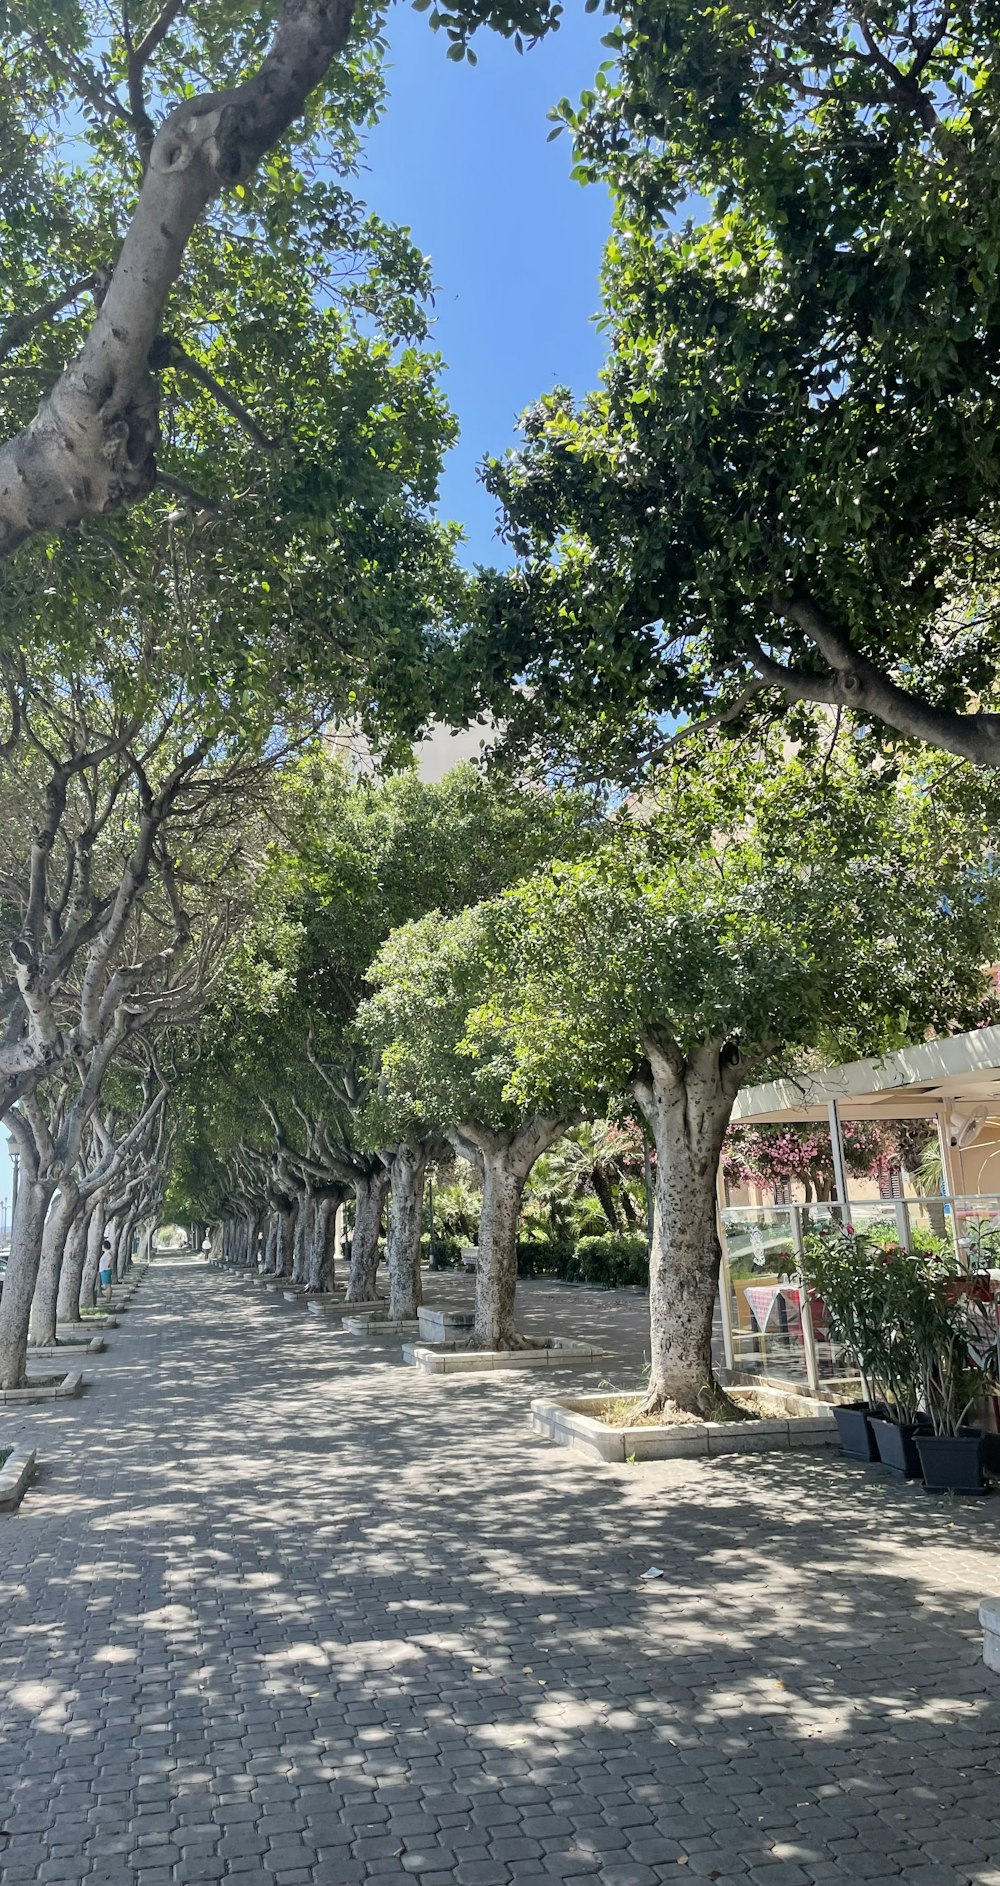 a street lined with trees and benches under a blue sky